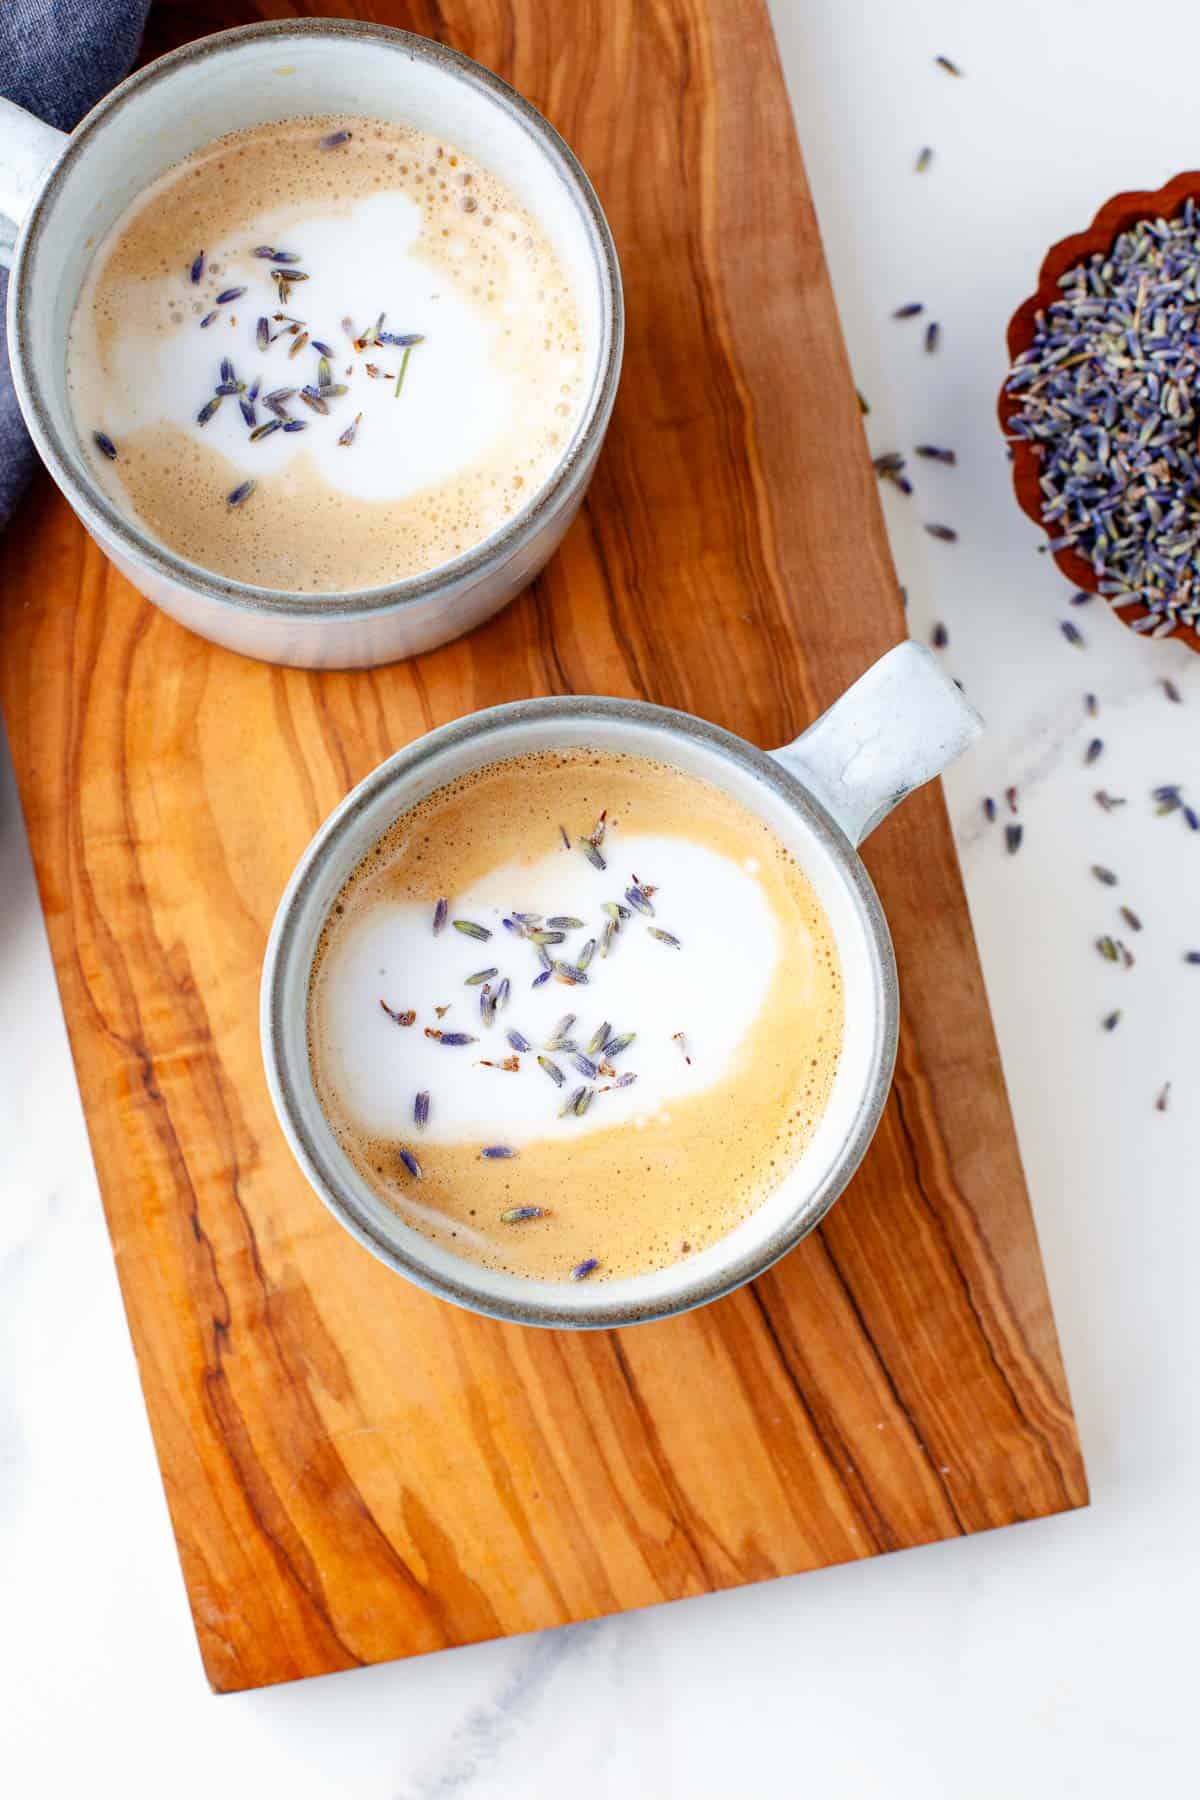 two lavender lattes in white mugs garnished with lavender buds atop wooden surface.